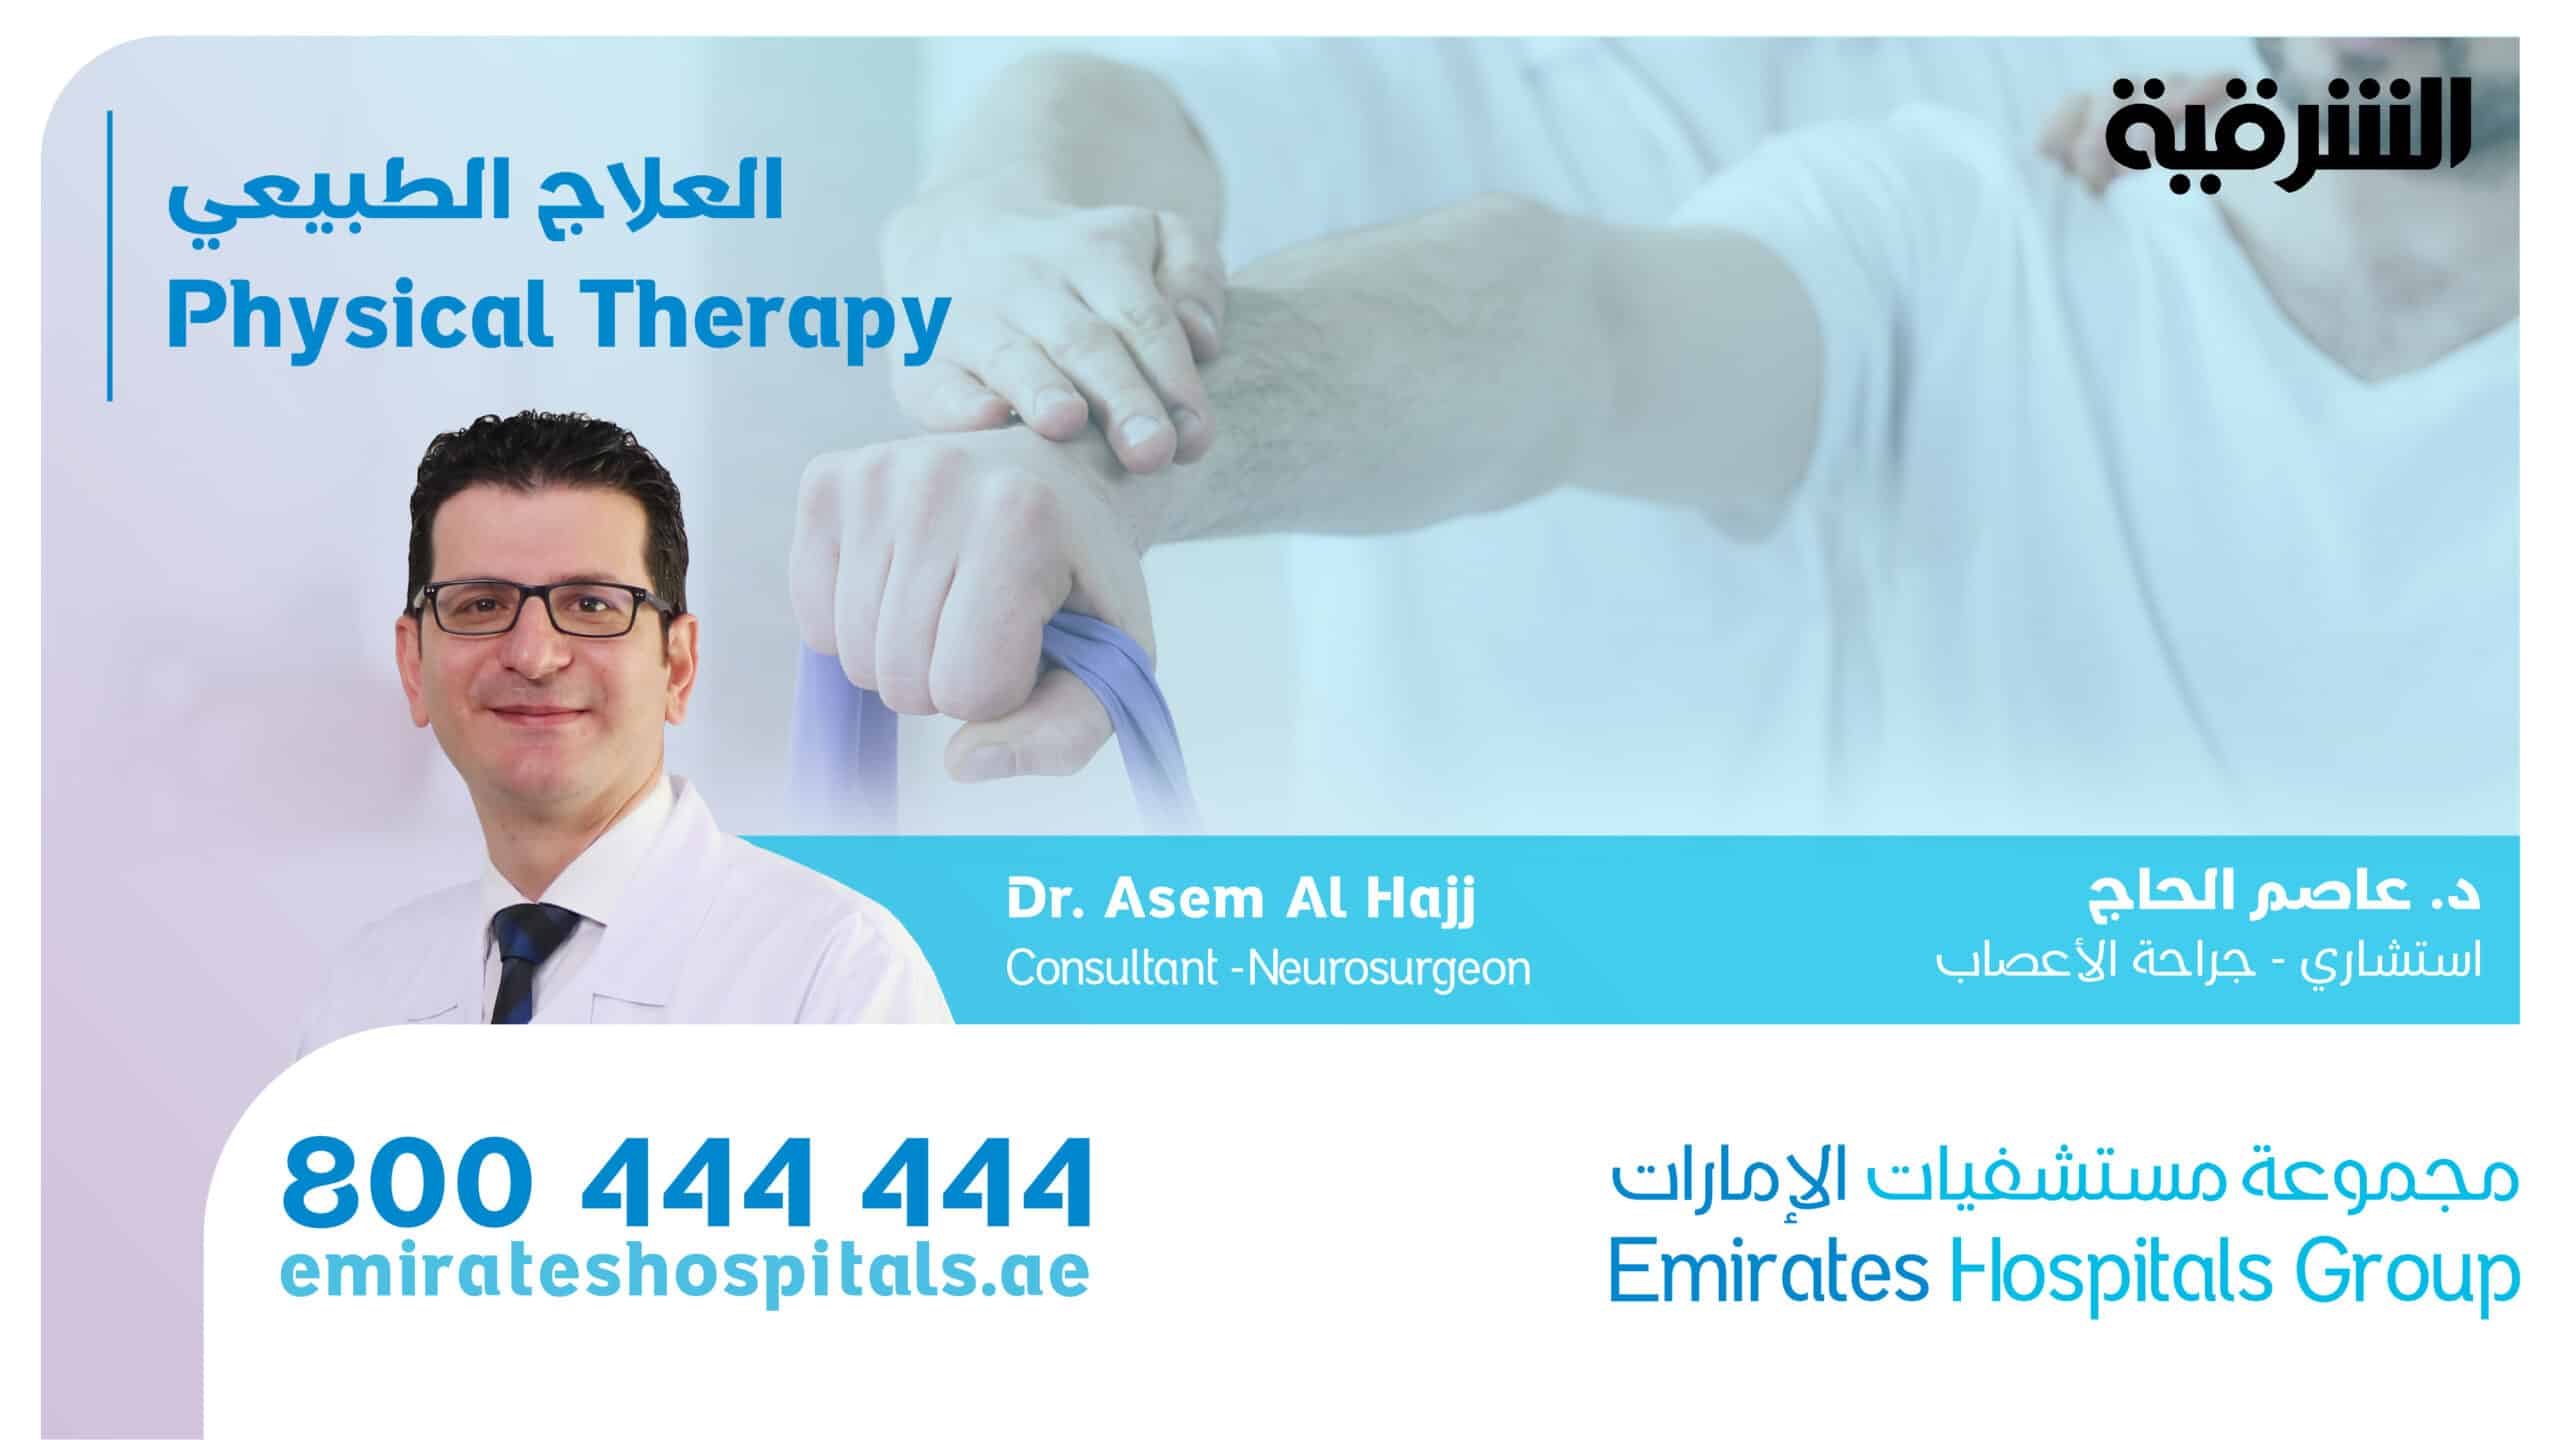 Physical Therapy | Dr. Asem Al Hajj , Consultant Neurosurgeon